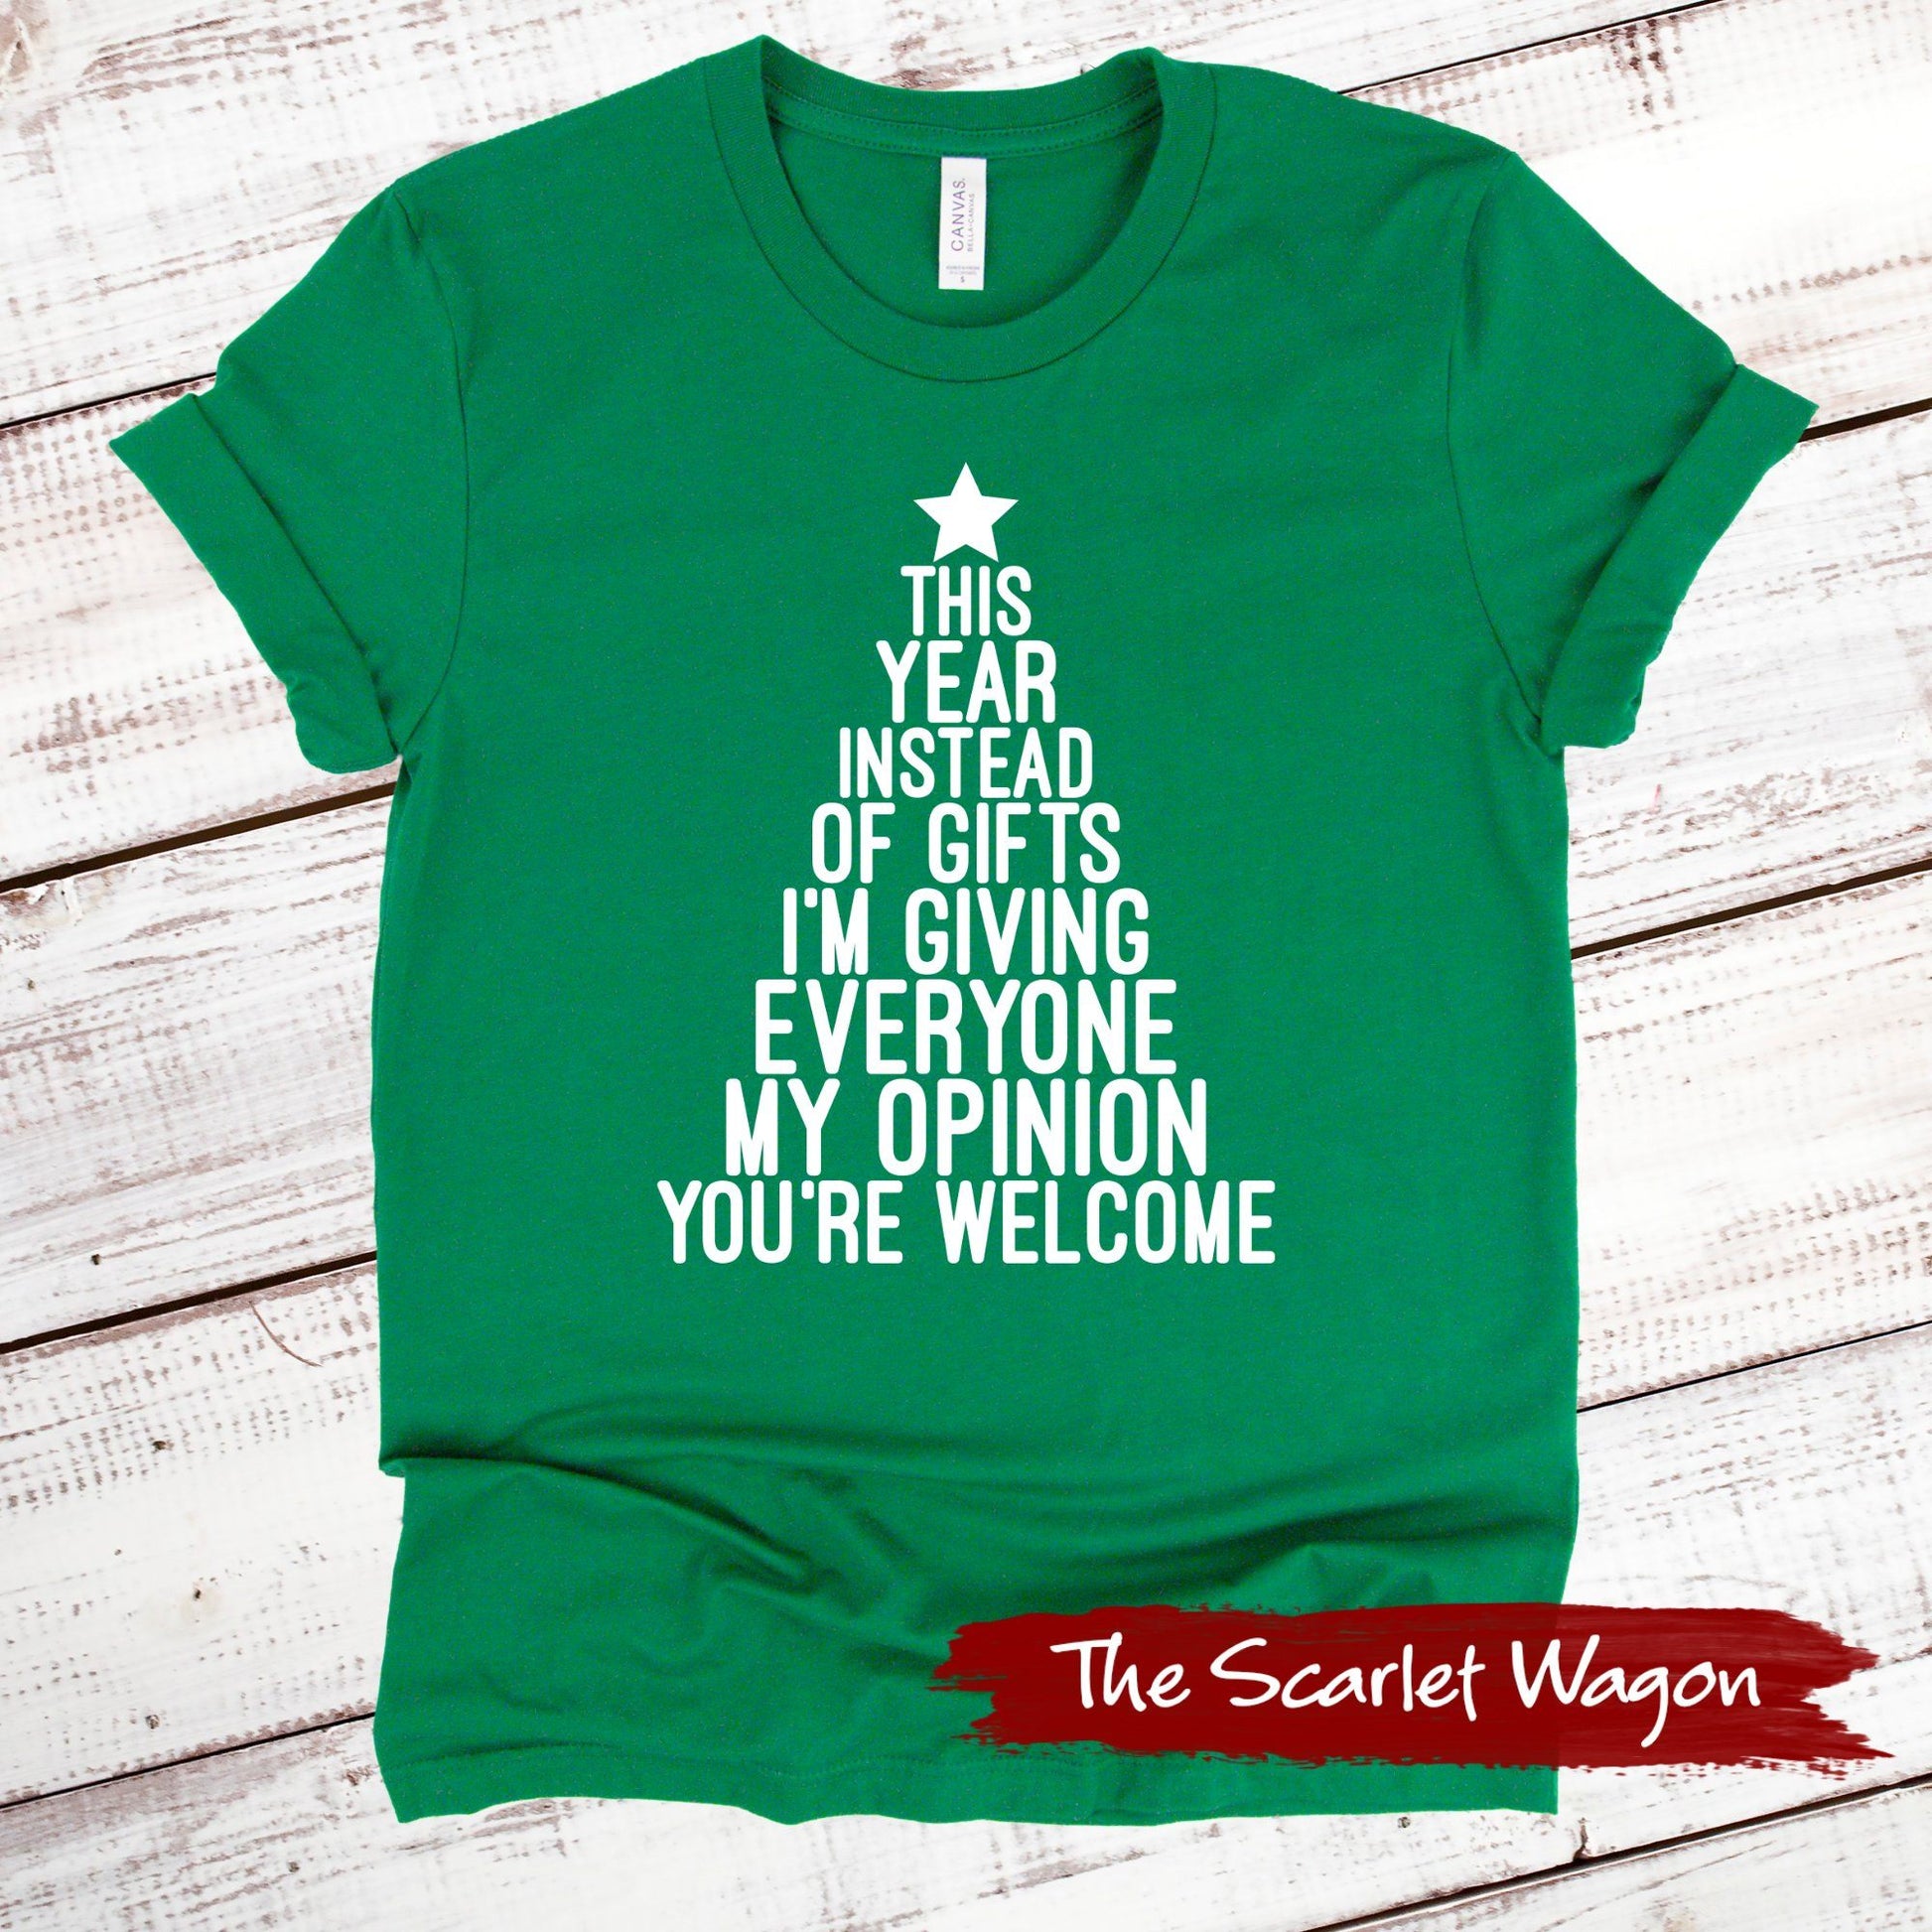 Instead of Gifts I'm Giving My Opinion Christmas Shirt Scarlet Wagon Green XS 